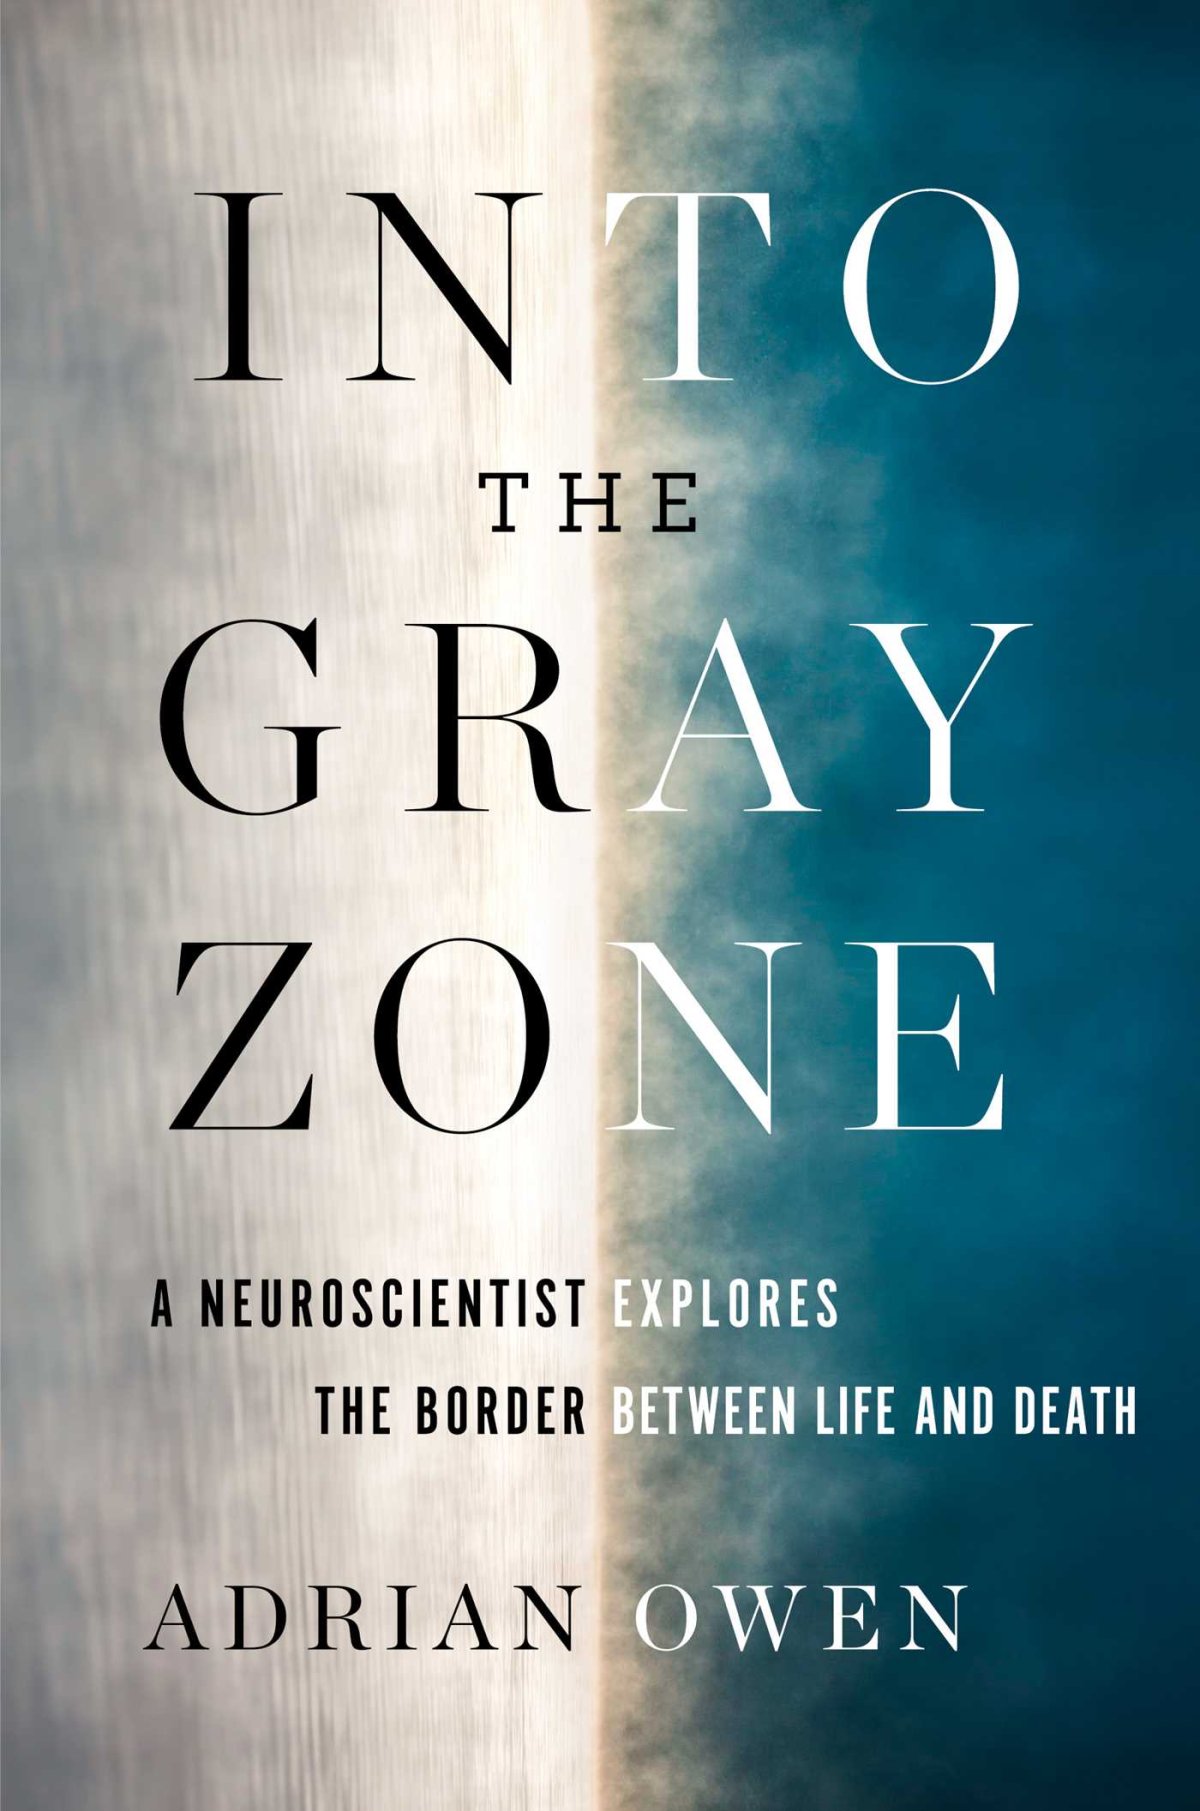 Prof. Adrian Owen's "Into the Gray Zone" documents 20 years of research into how patients once believed to be in vegetative states are actually more alert than once realized.